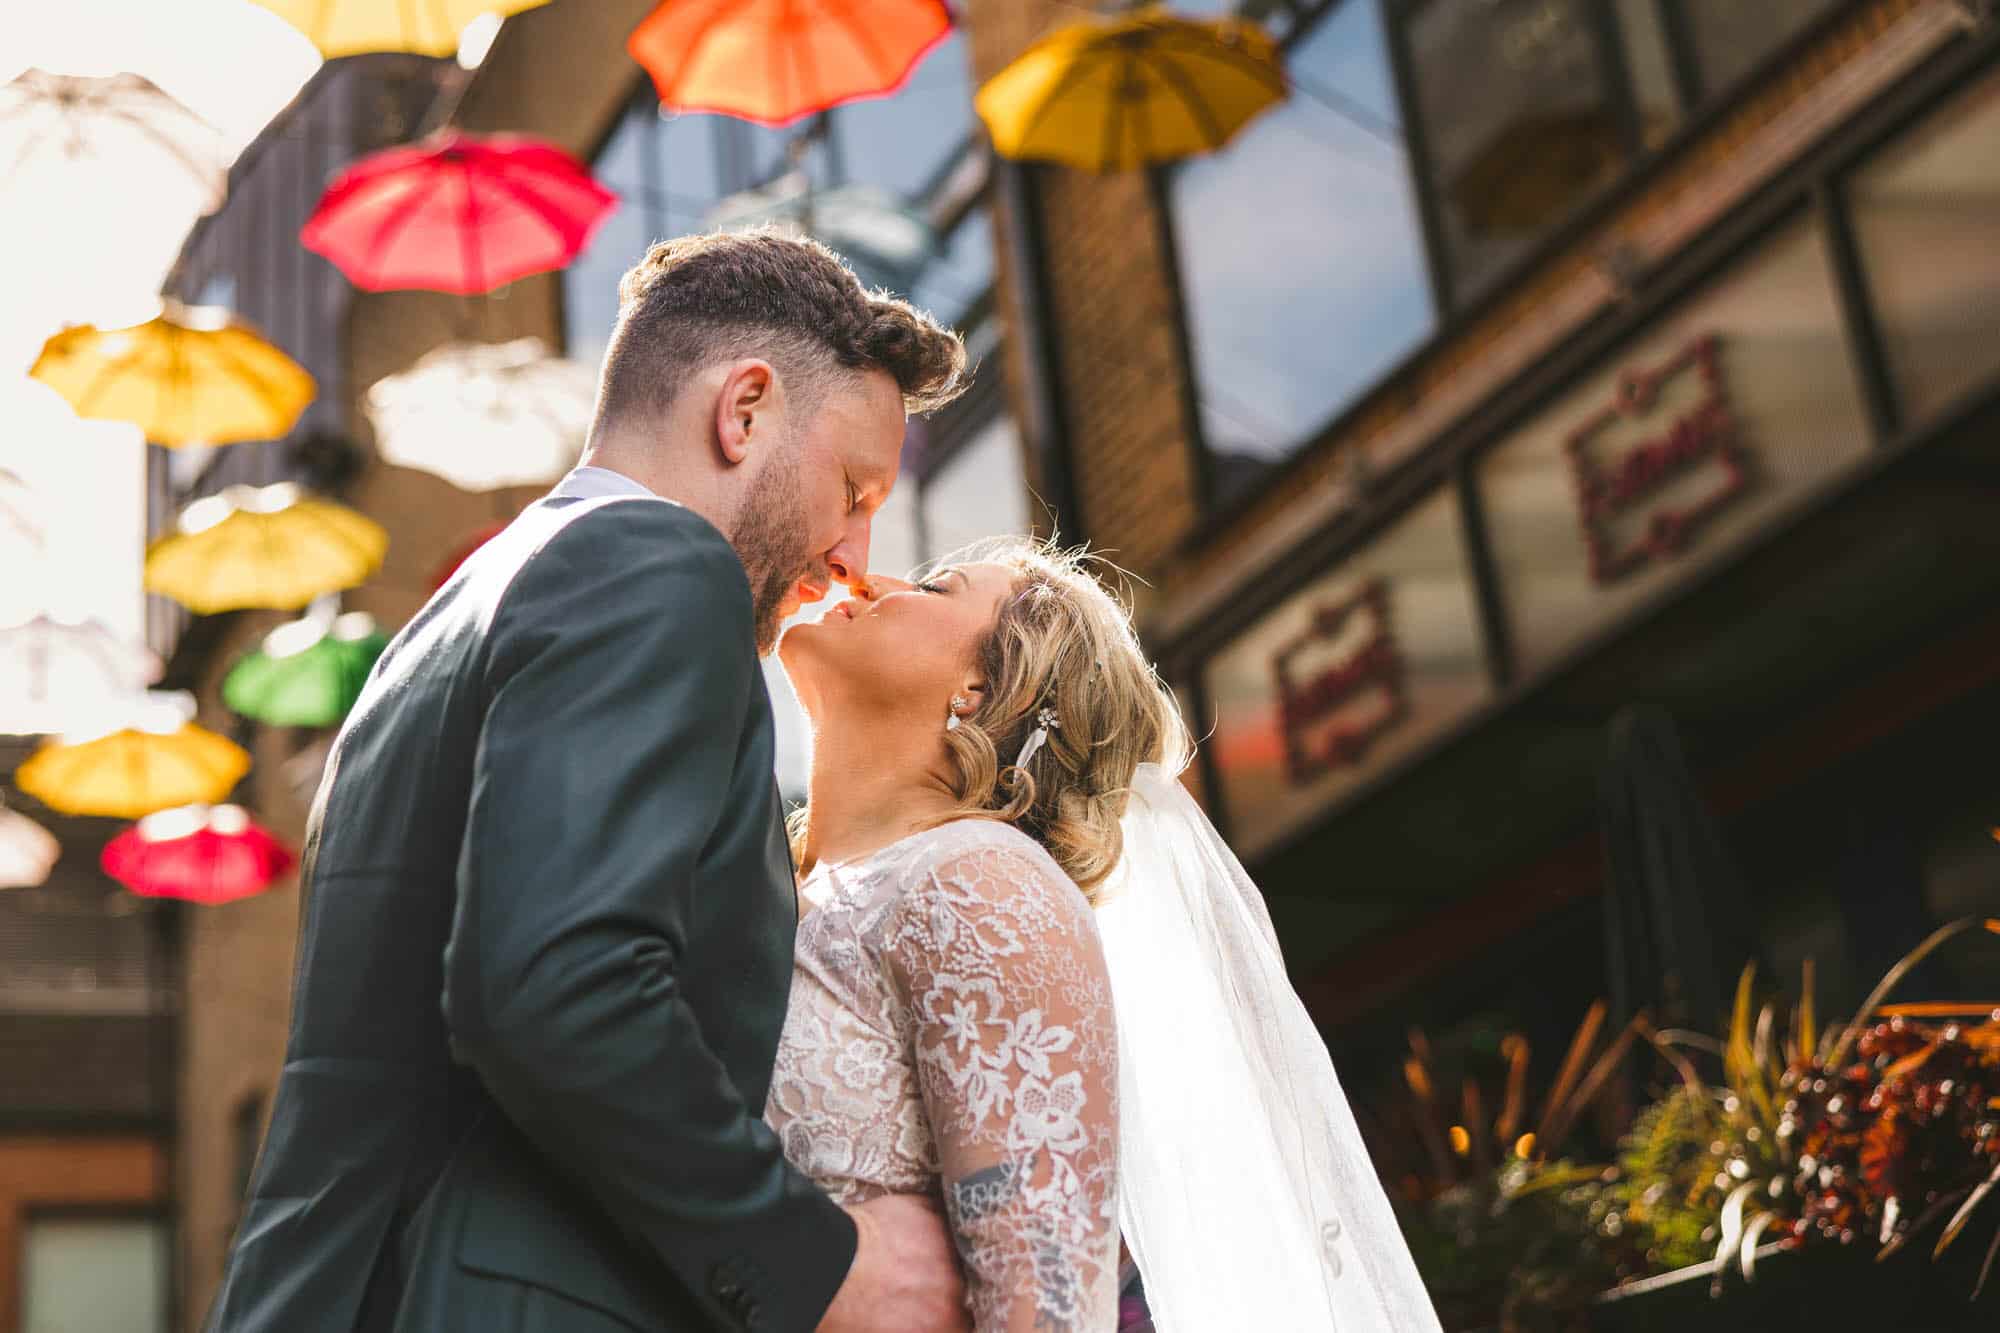 How to Find the Perfect Photographer for Your Wedding Near You